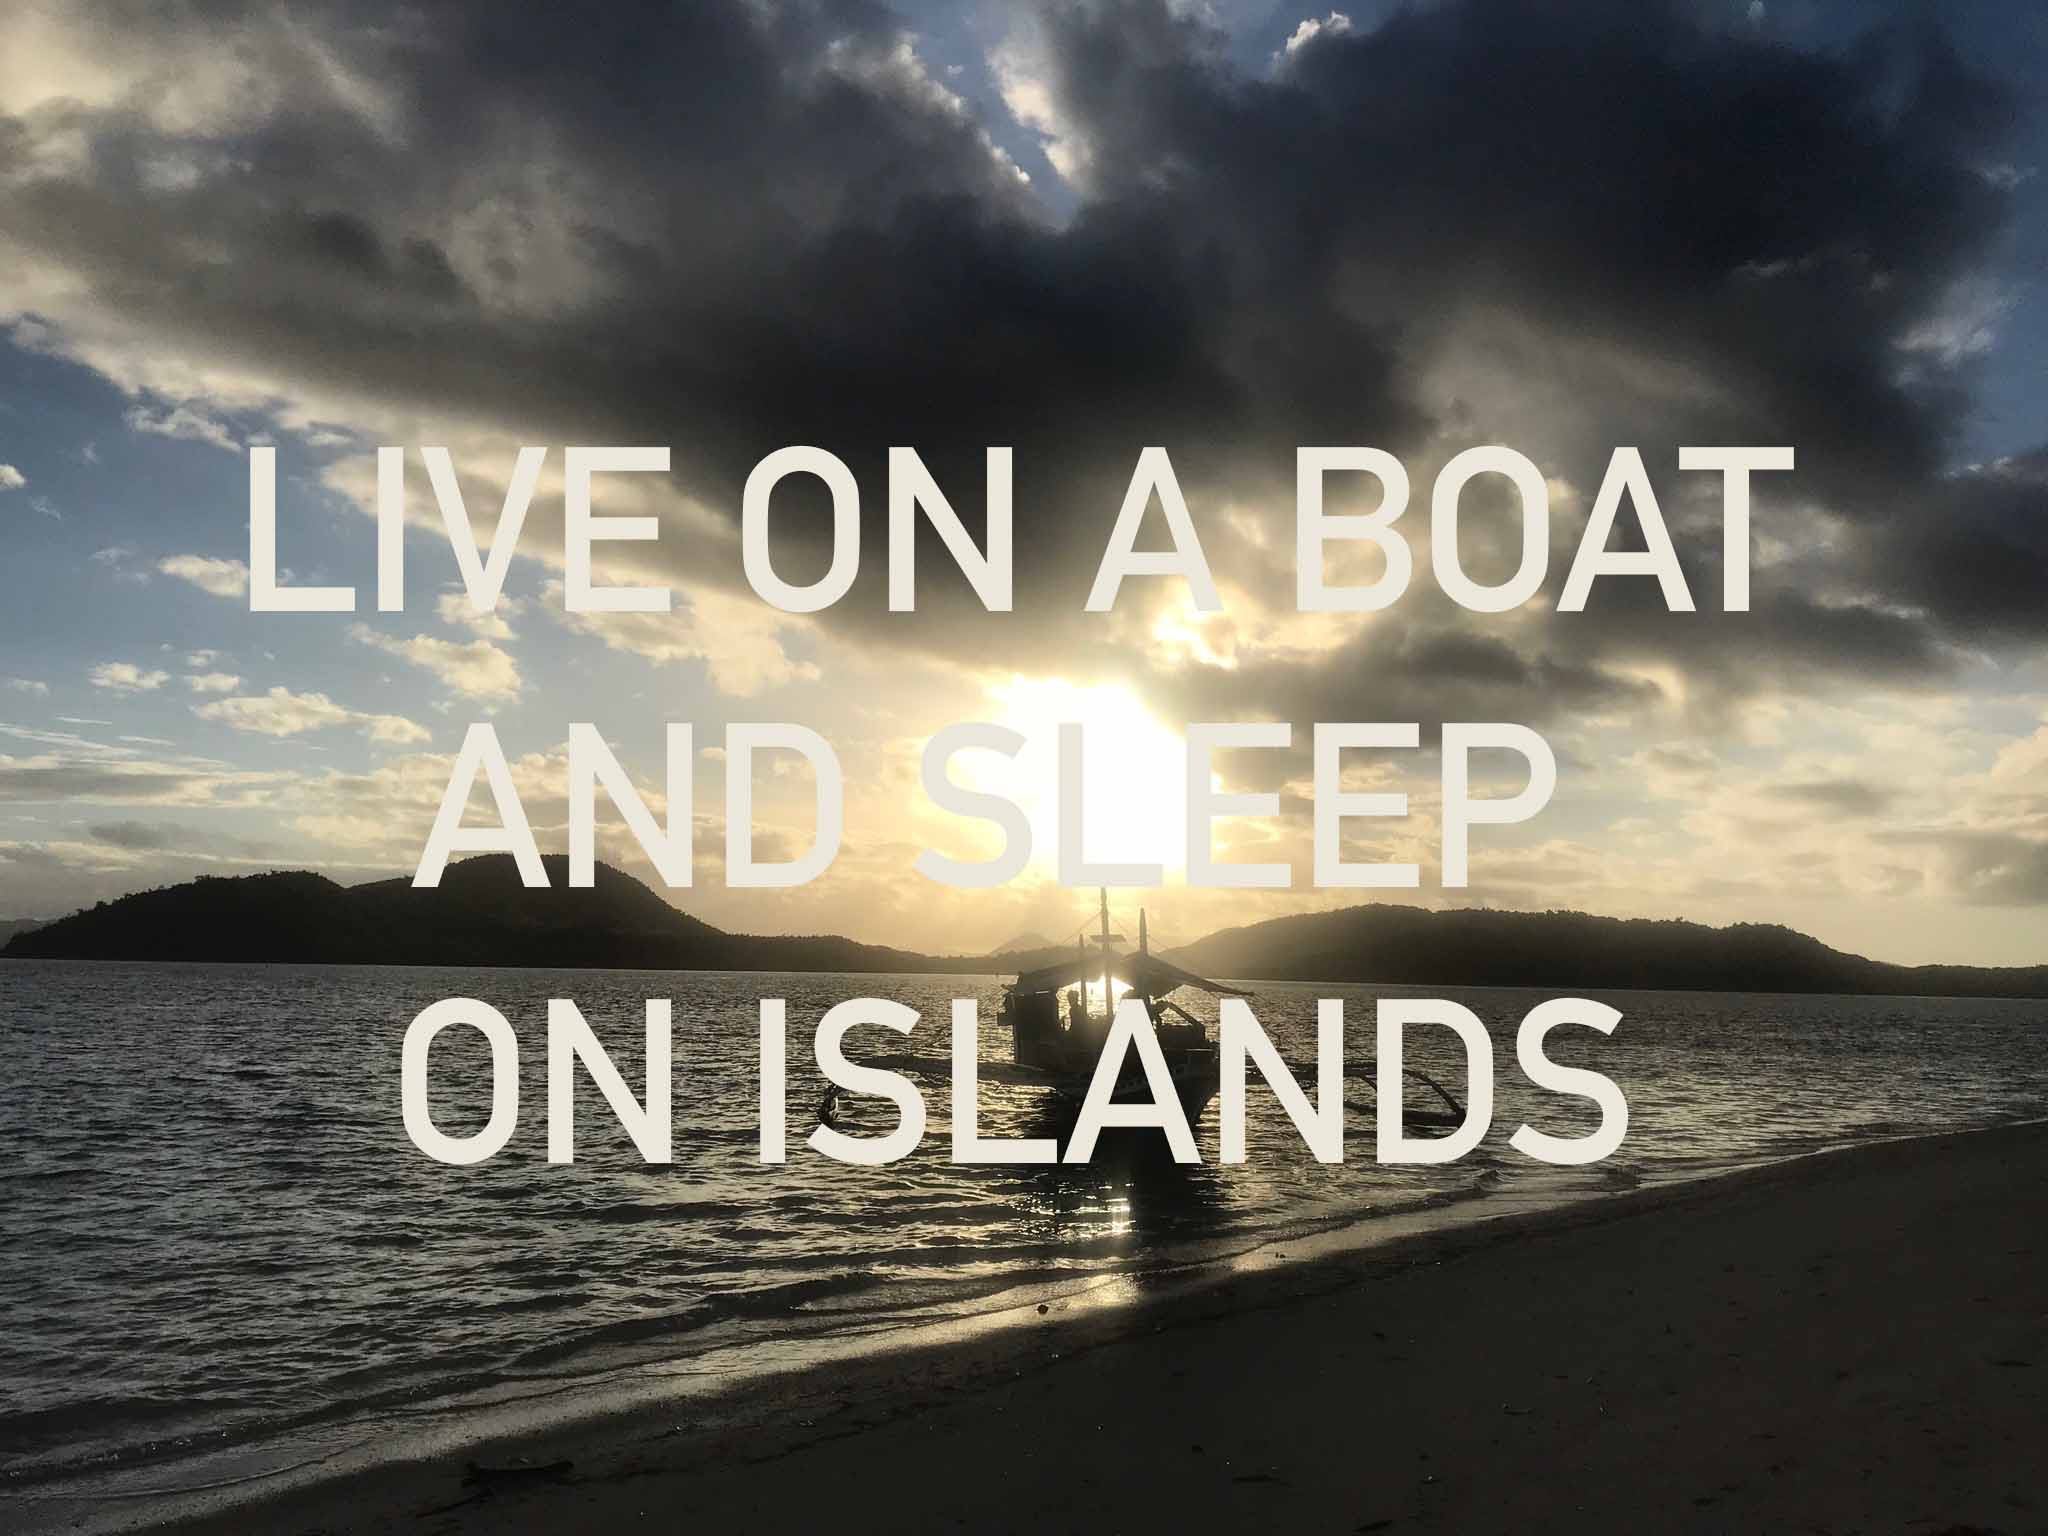 Live on a boat and sleep on islands